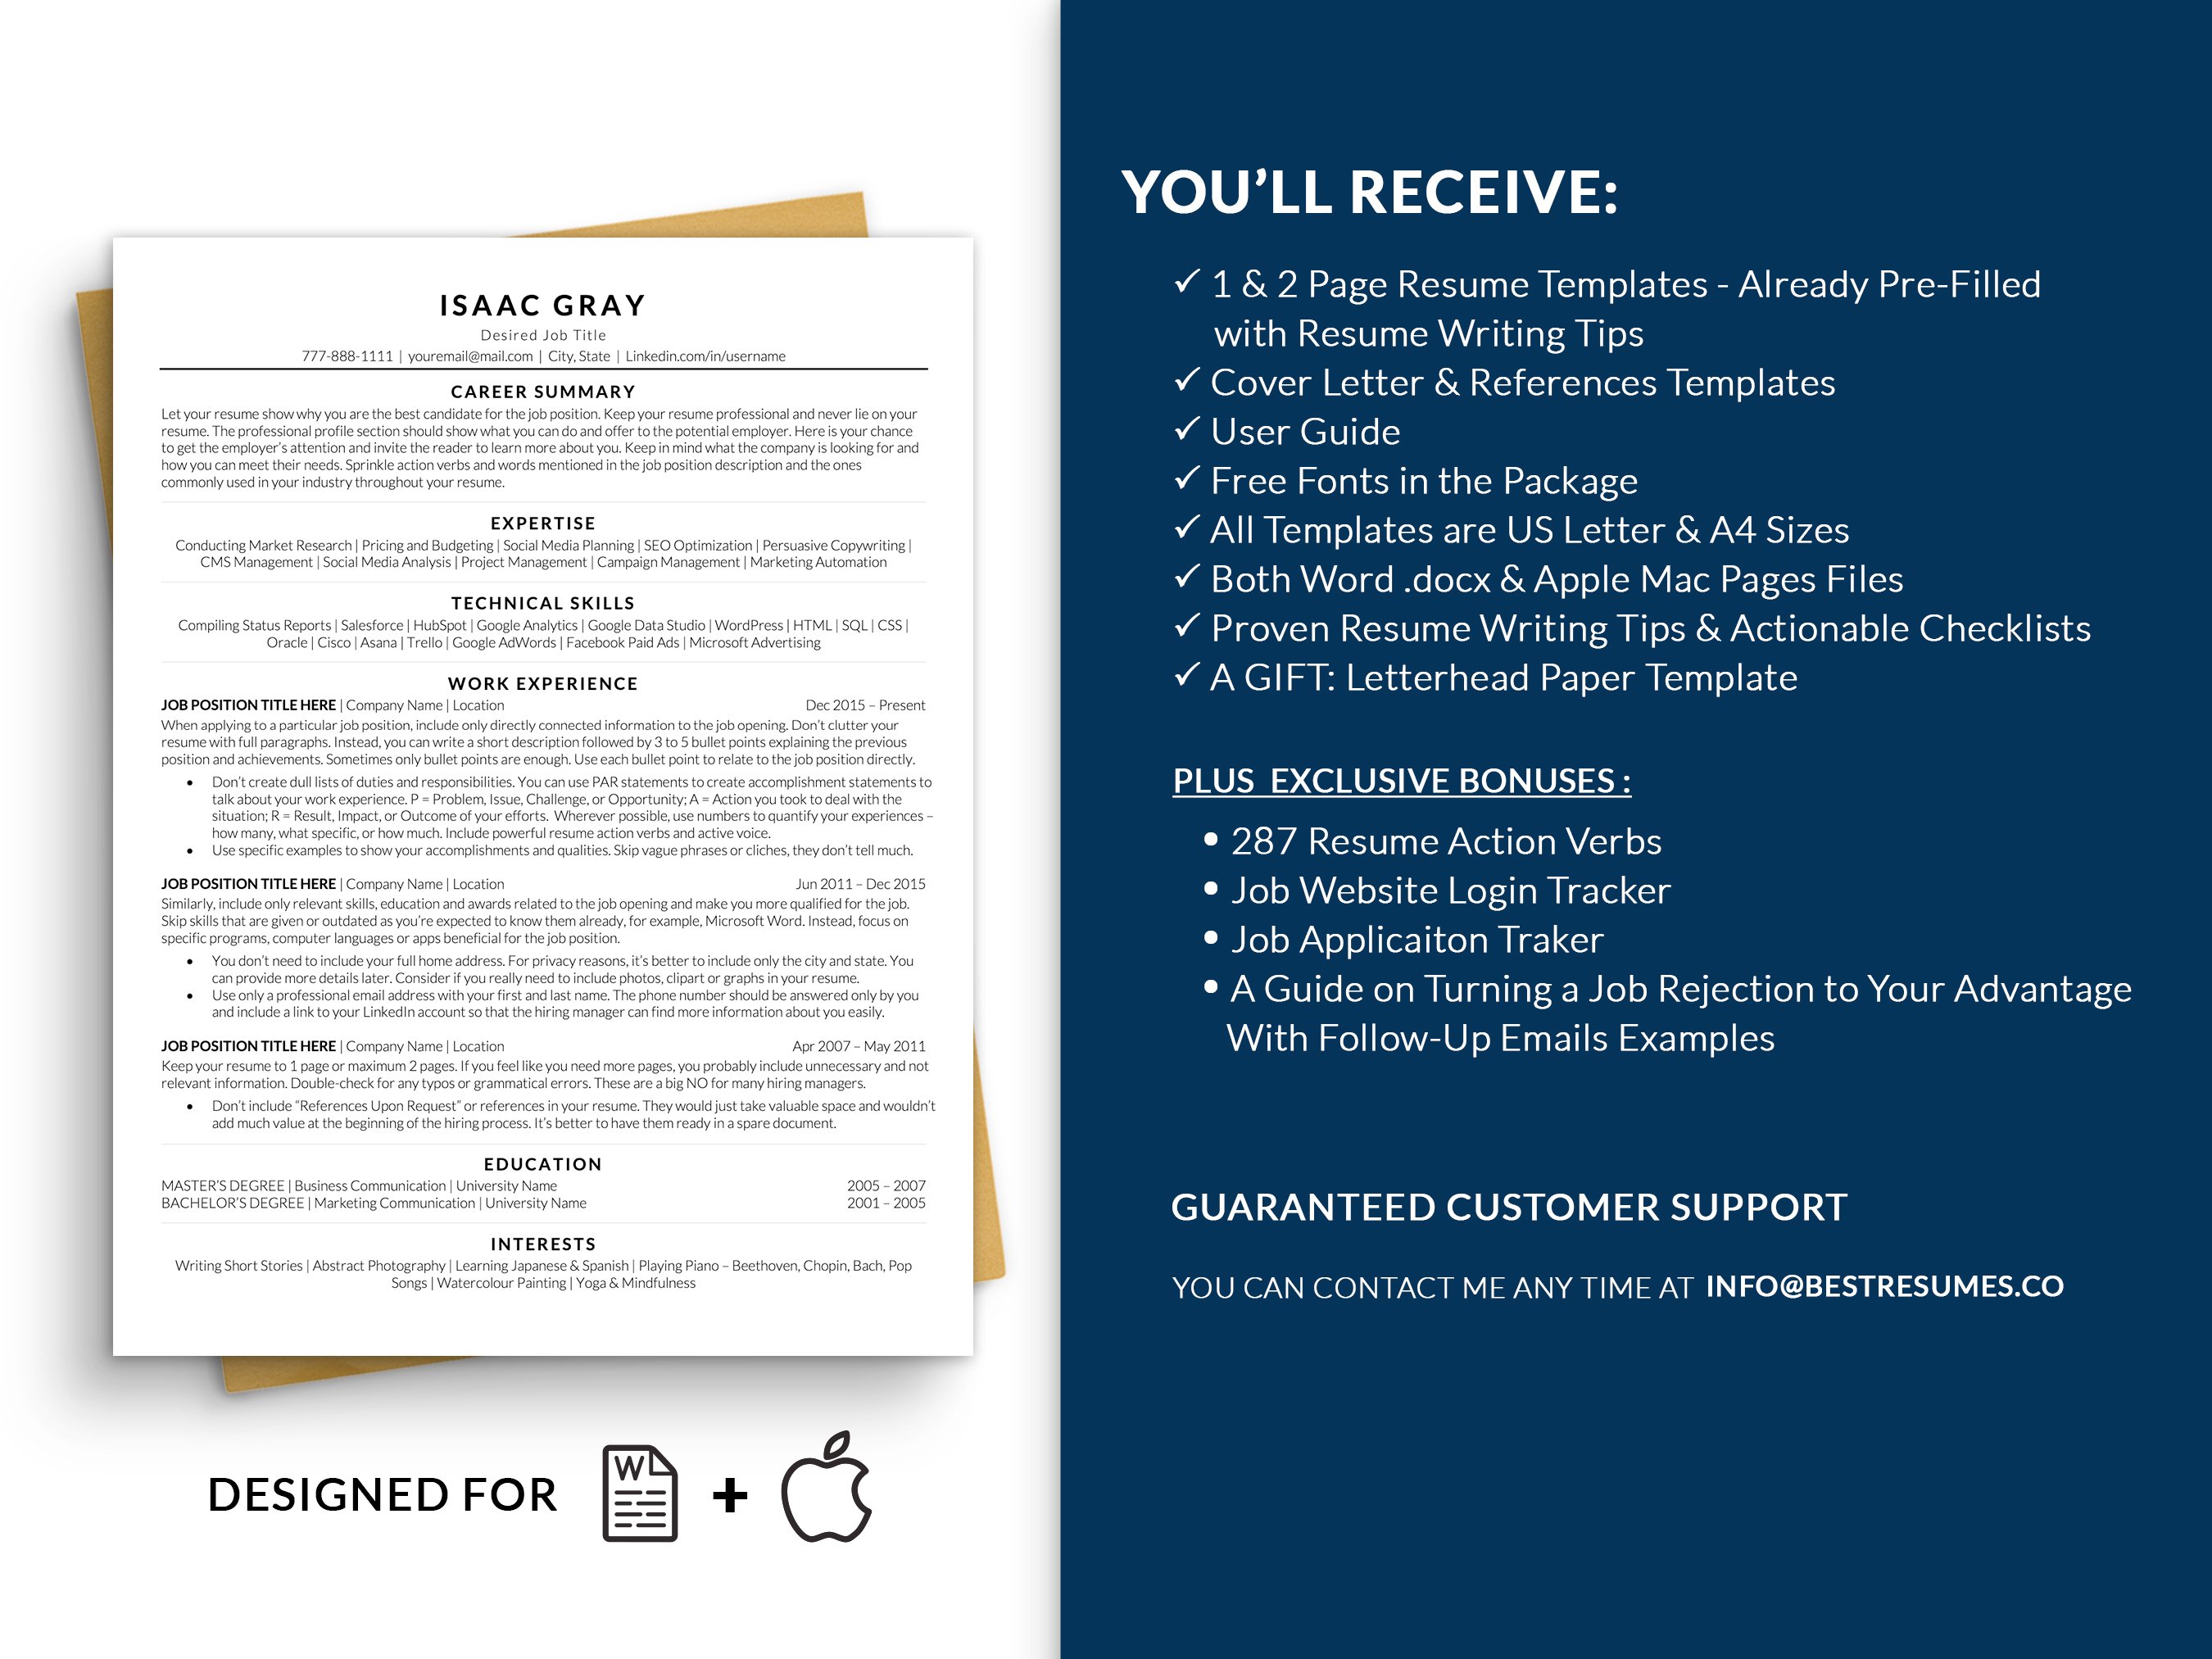 ats resume template word full resume package isaac gray 613